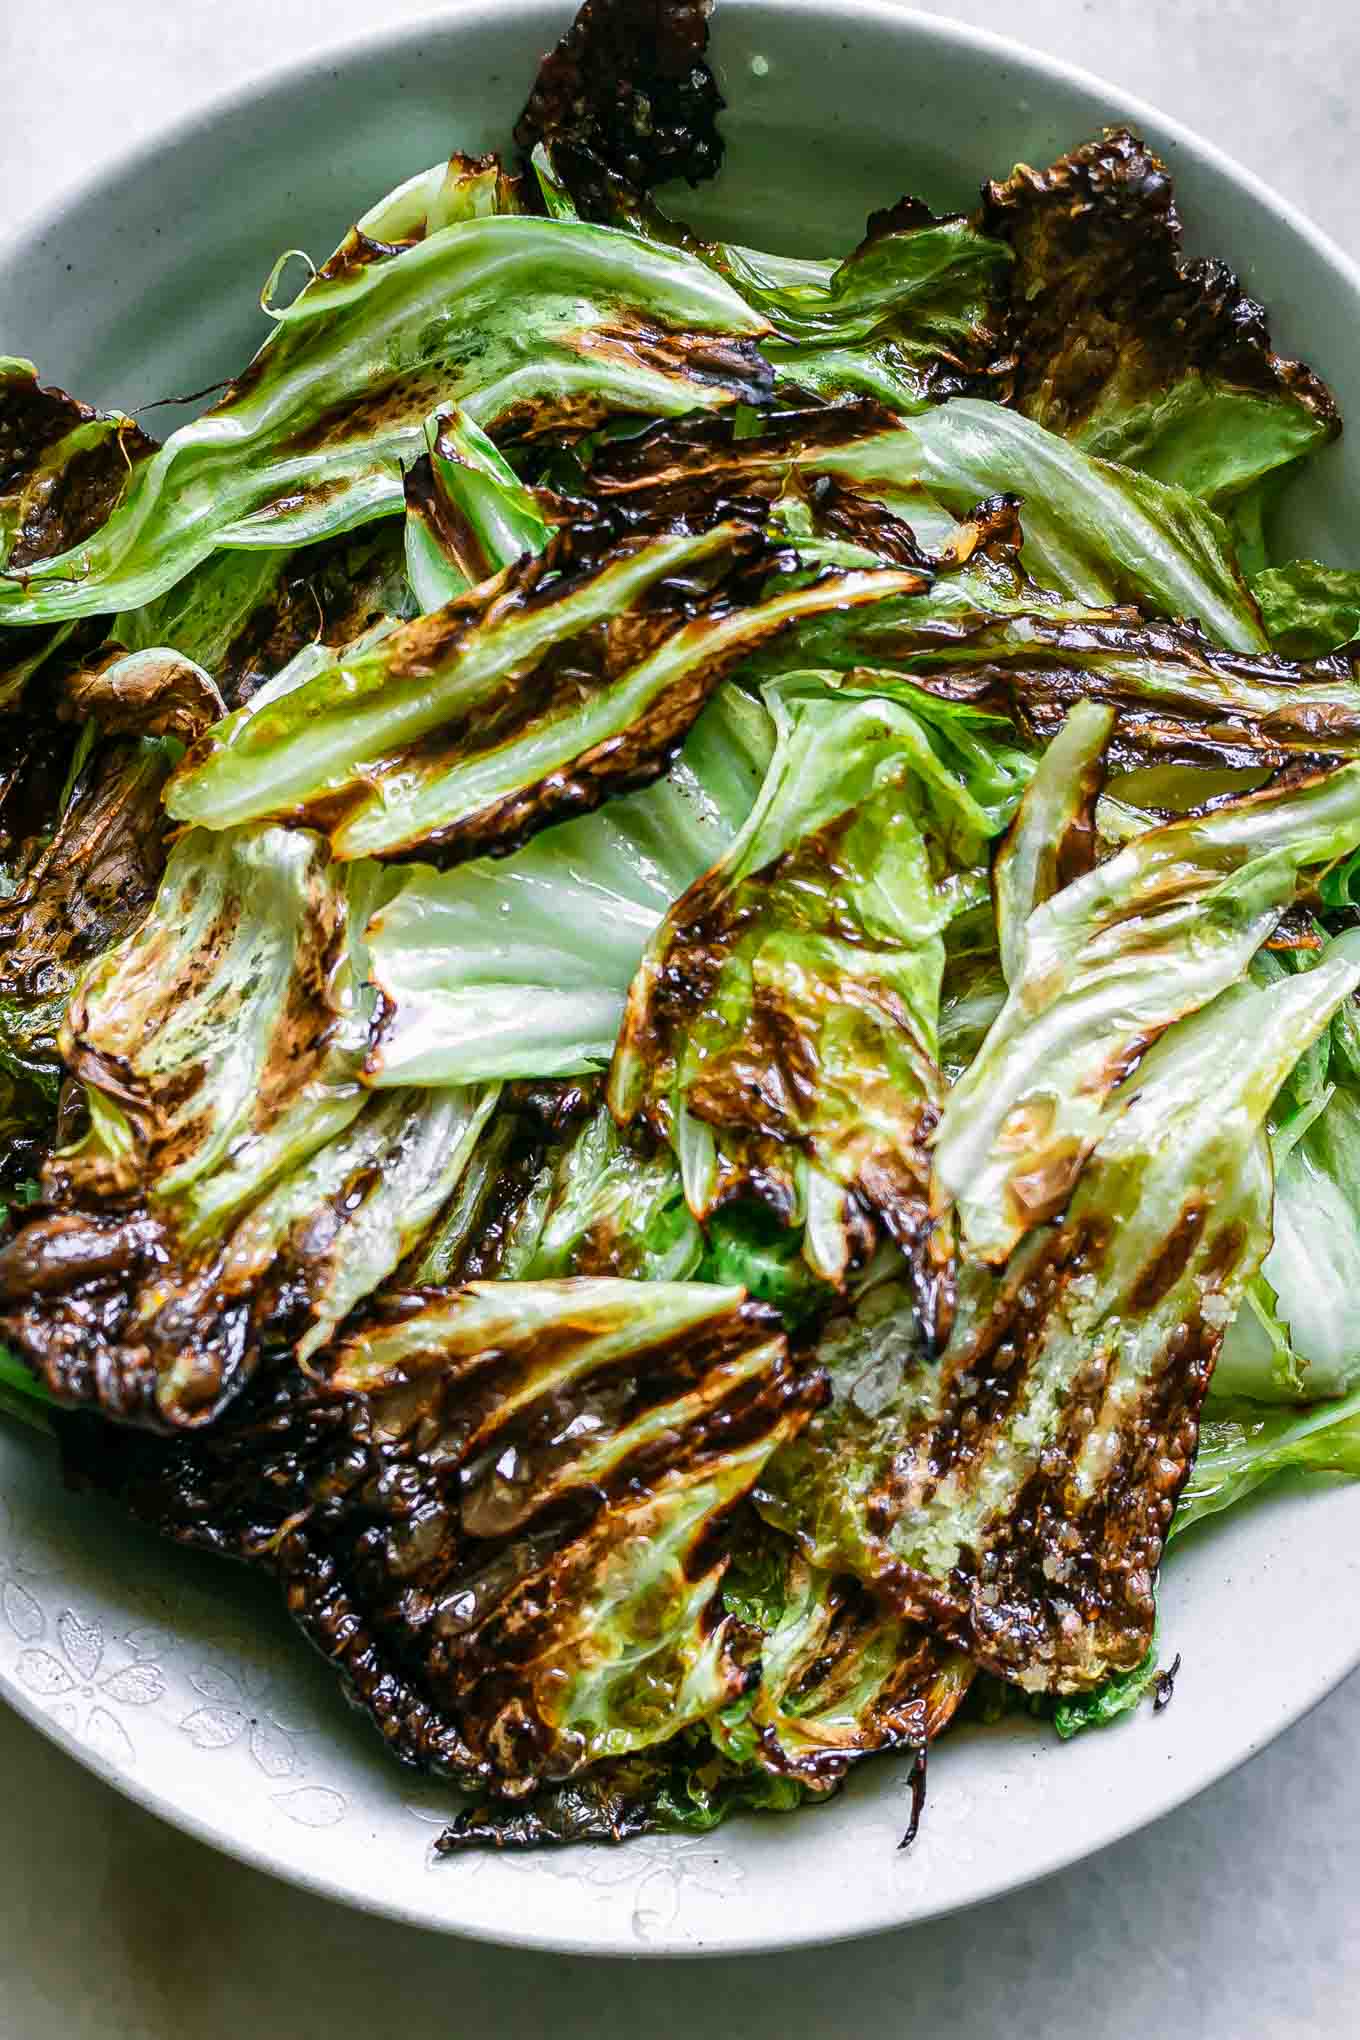 a close up photo of roasted cabbage leaves on a plate